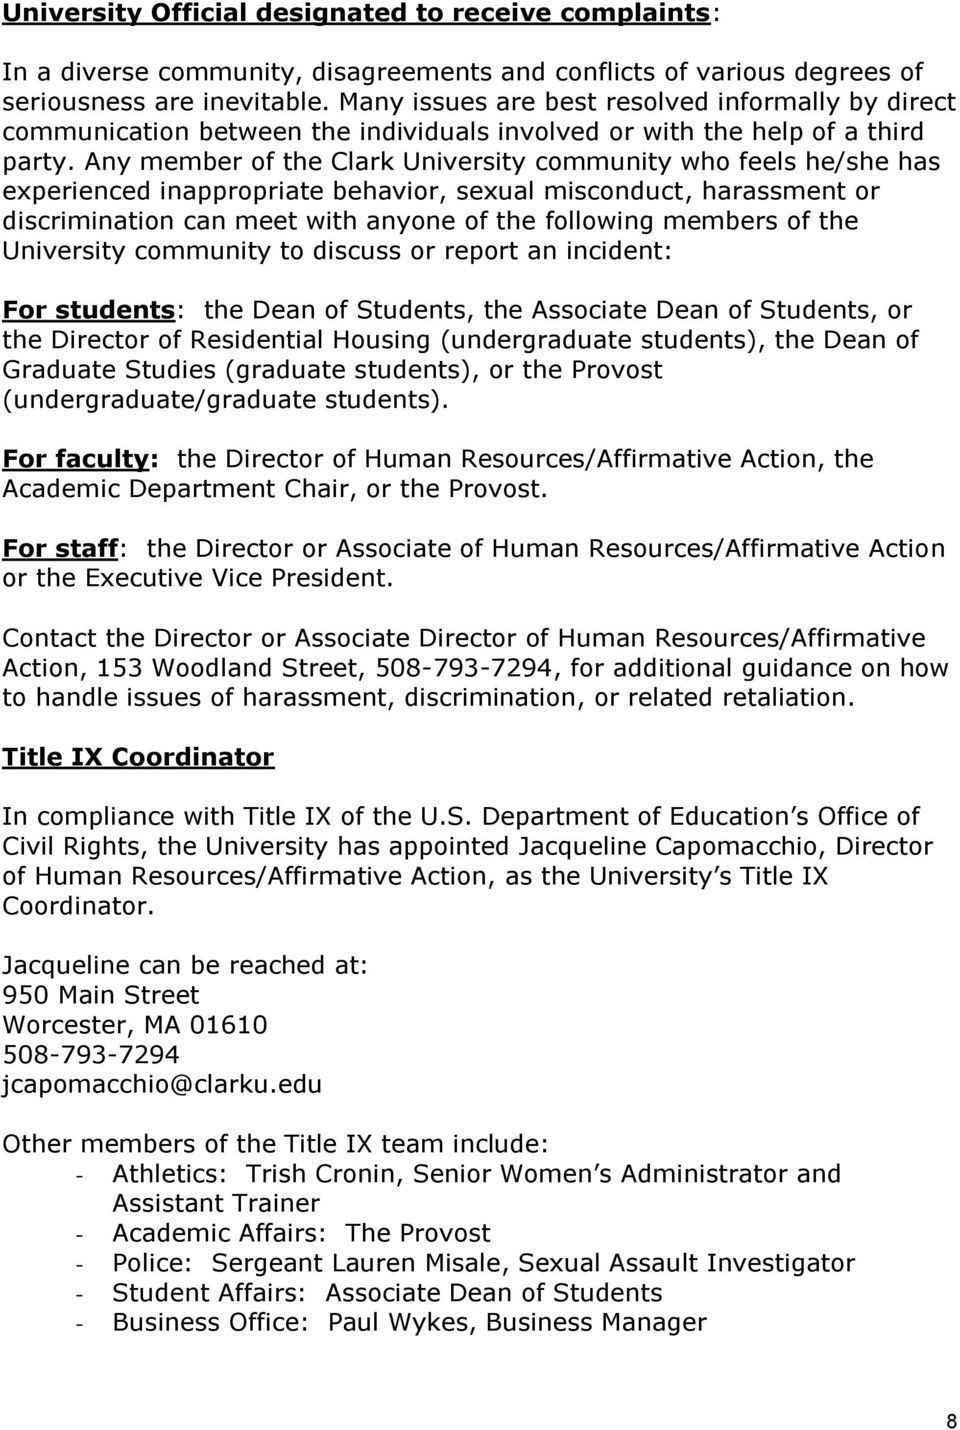 Any member of the Clark University community who feels he/she has experienced inappropriate behavior, sexual misconduct, harassment or discrimination can meet with anyone of the following members of